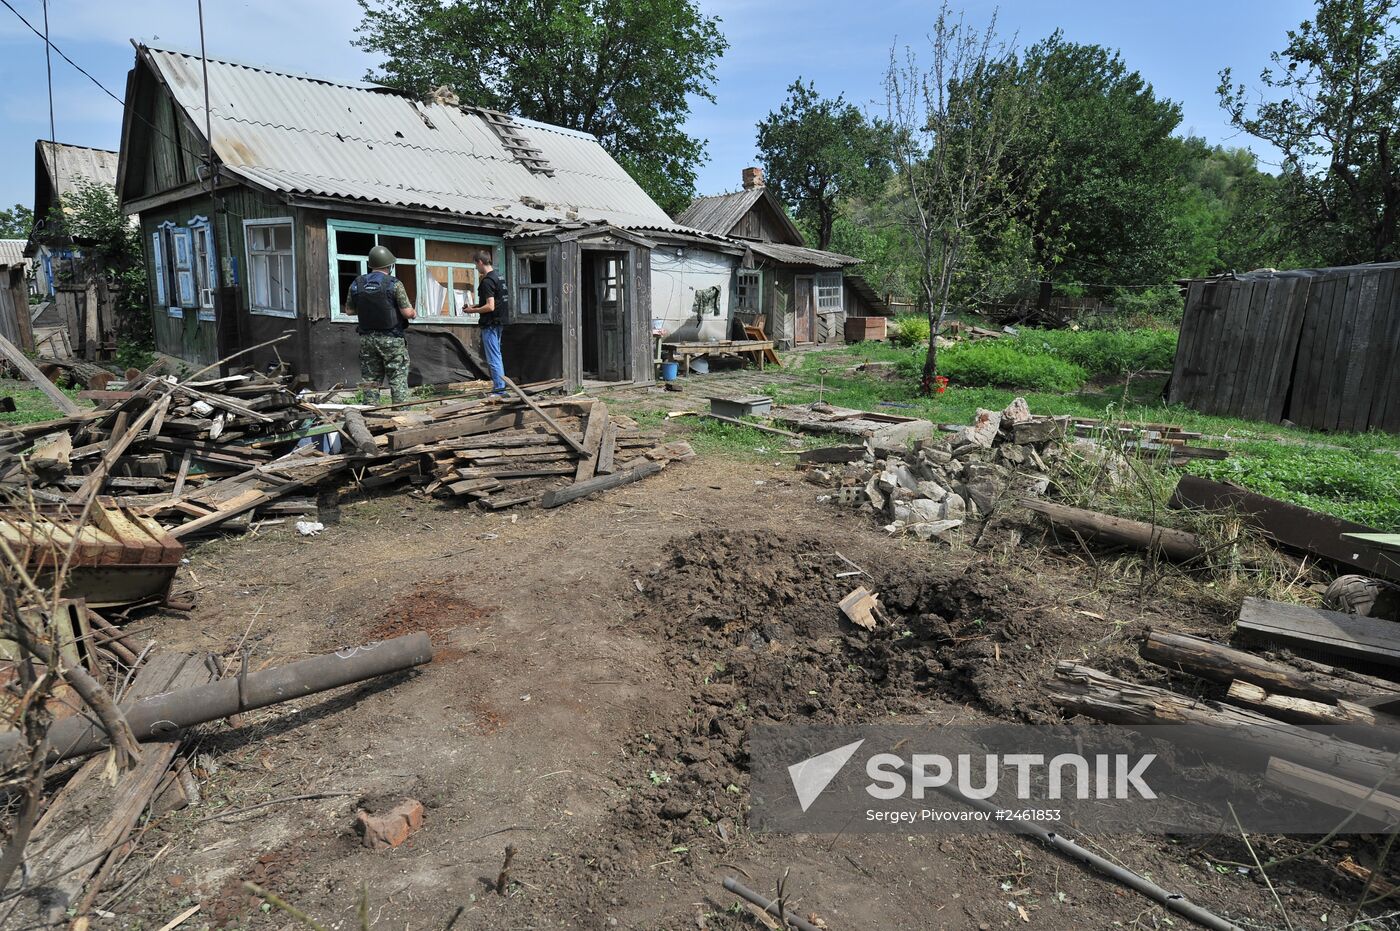 Town of Donetsk, Rostov Region, attacked with HE shells from Ukrainian side